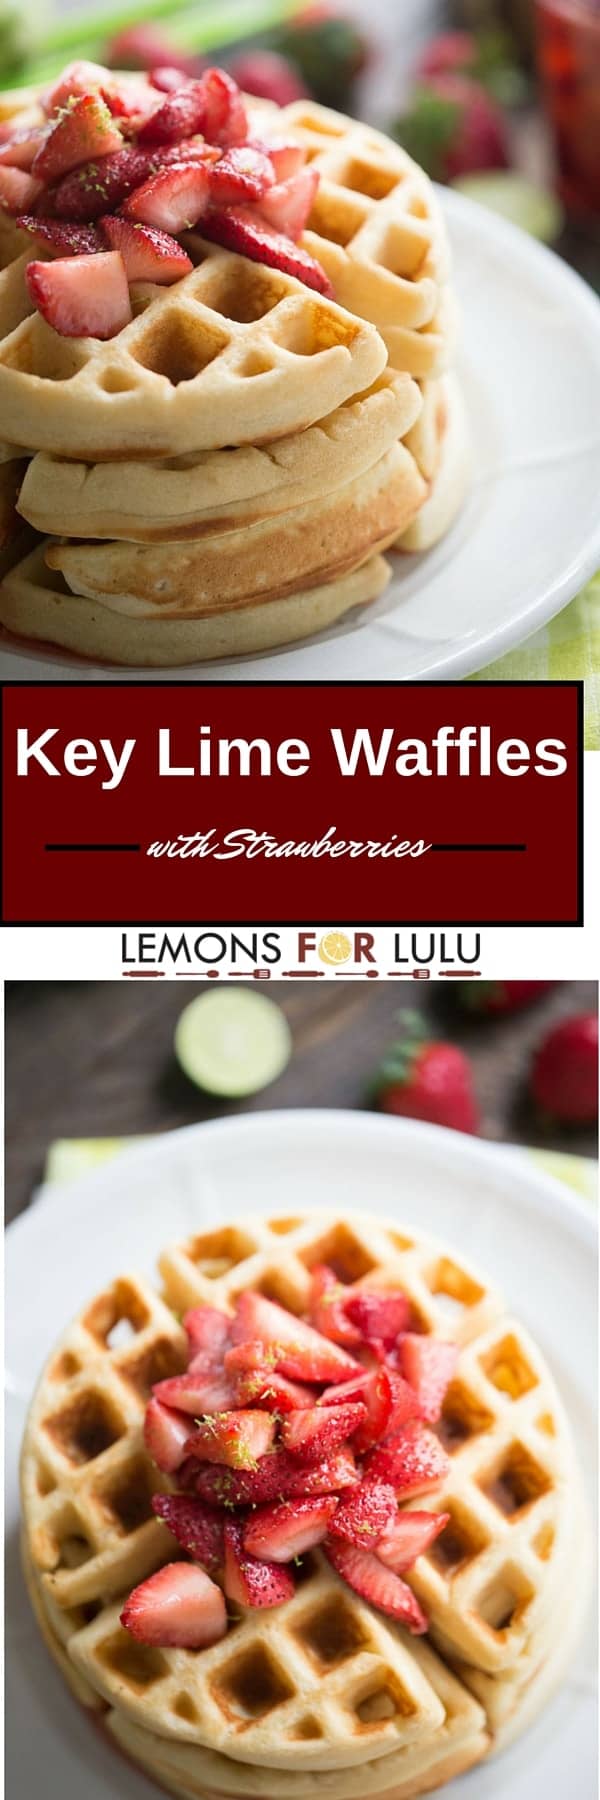 Nothing beats fluffy waffle for breakfast! This homemade waffles recipe has tangy key lime flavor on the inside and sweet, fresh strawberries on the top! An easy recipe for special occasions or lazy weekends!